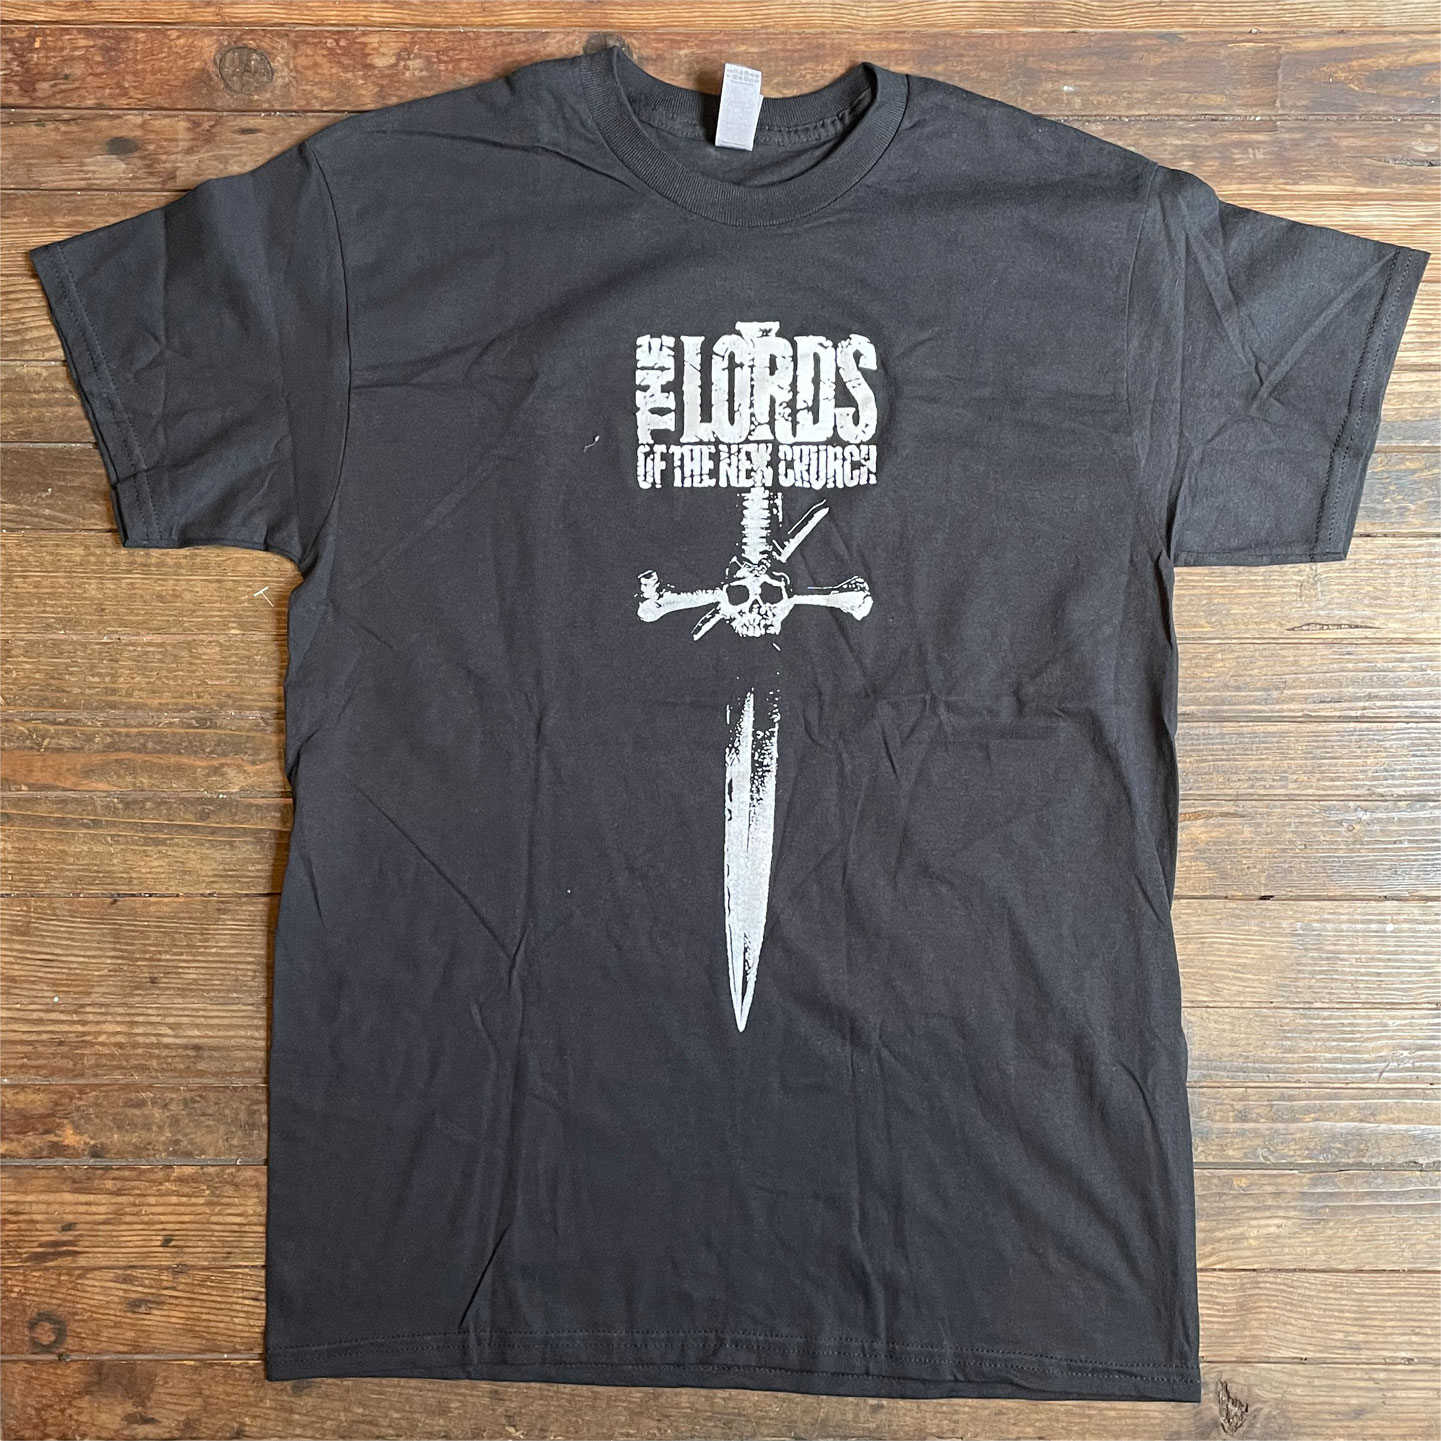 THE LORDS OF THE NEW CHURCH Tシャツ SWORD